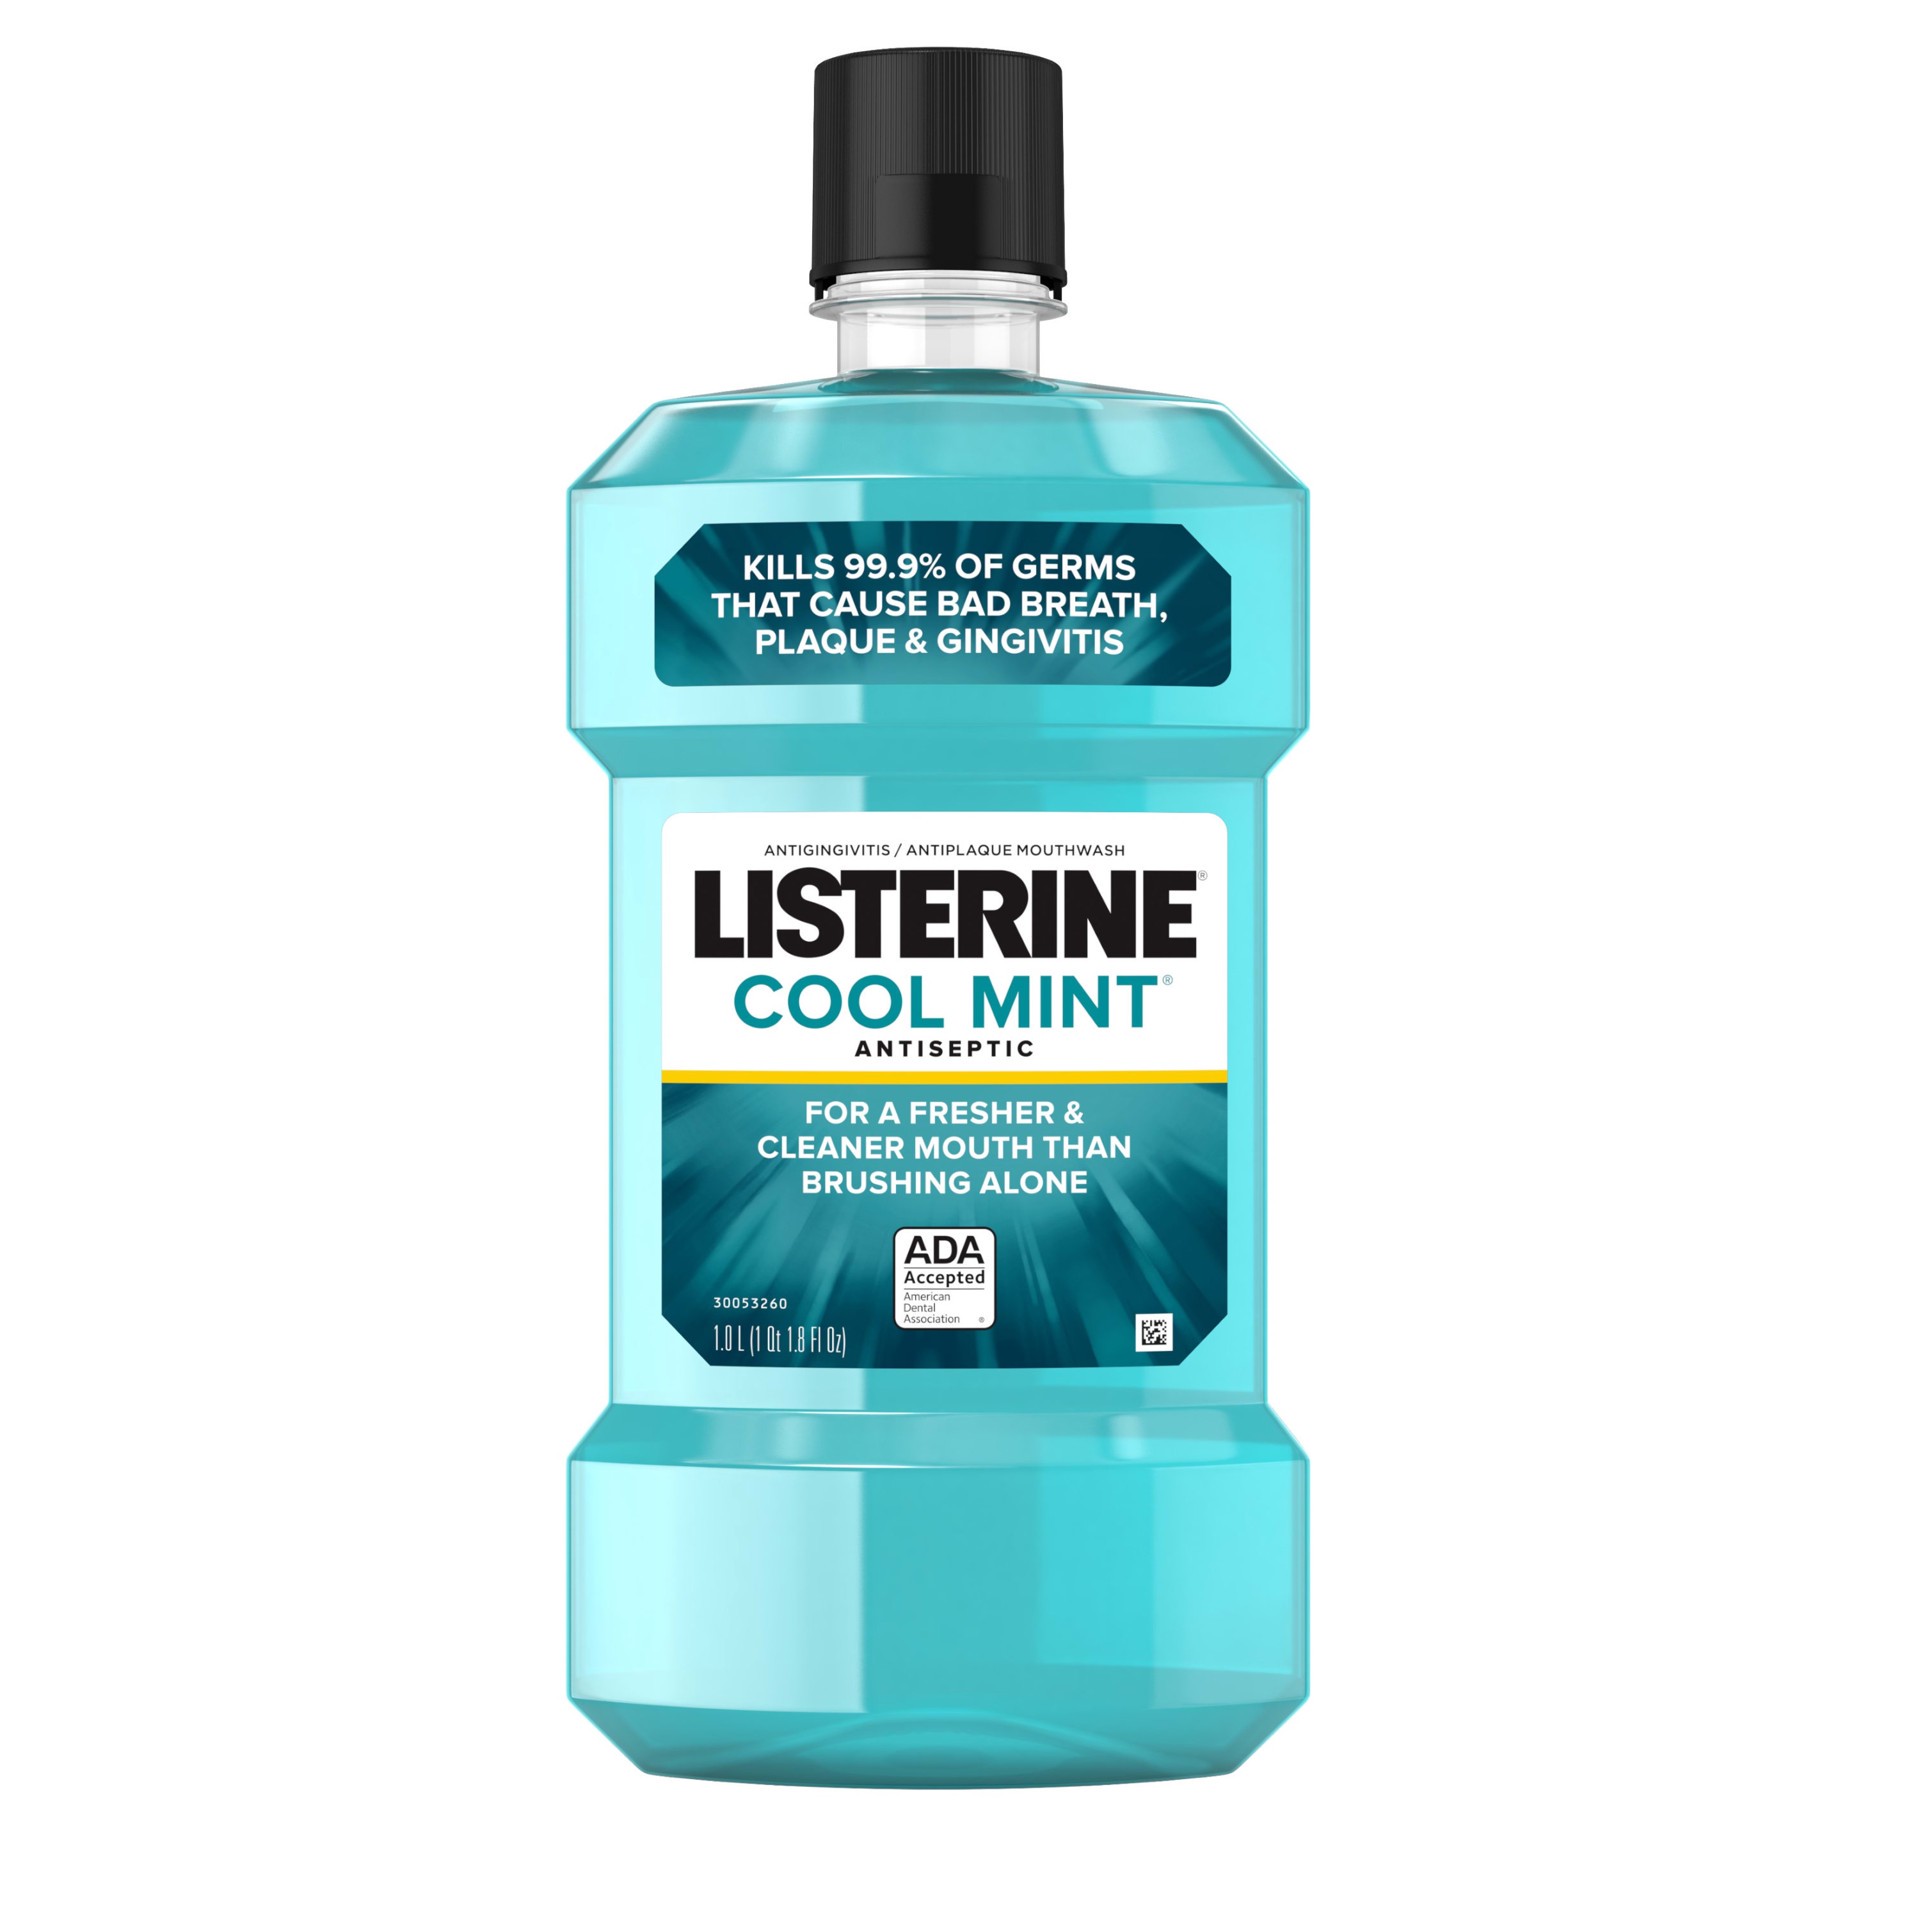 slide 1 of 6, Listerine Cool Mint Antiseptic Mouthwash, Daily Oral Rinse Kills 99% of Germs that Cause Bad Breath, Plaque and Gingivitis for a Fresher, Cleaner Mouth, Cool Mint Flavor, 1.0 L, 1 L